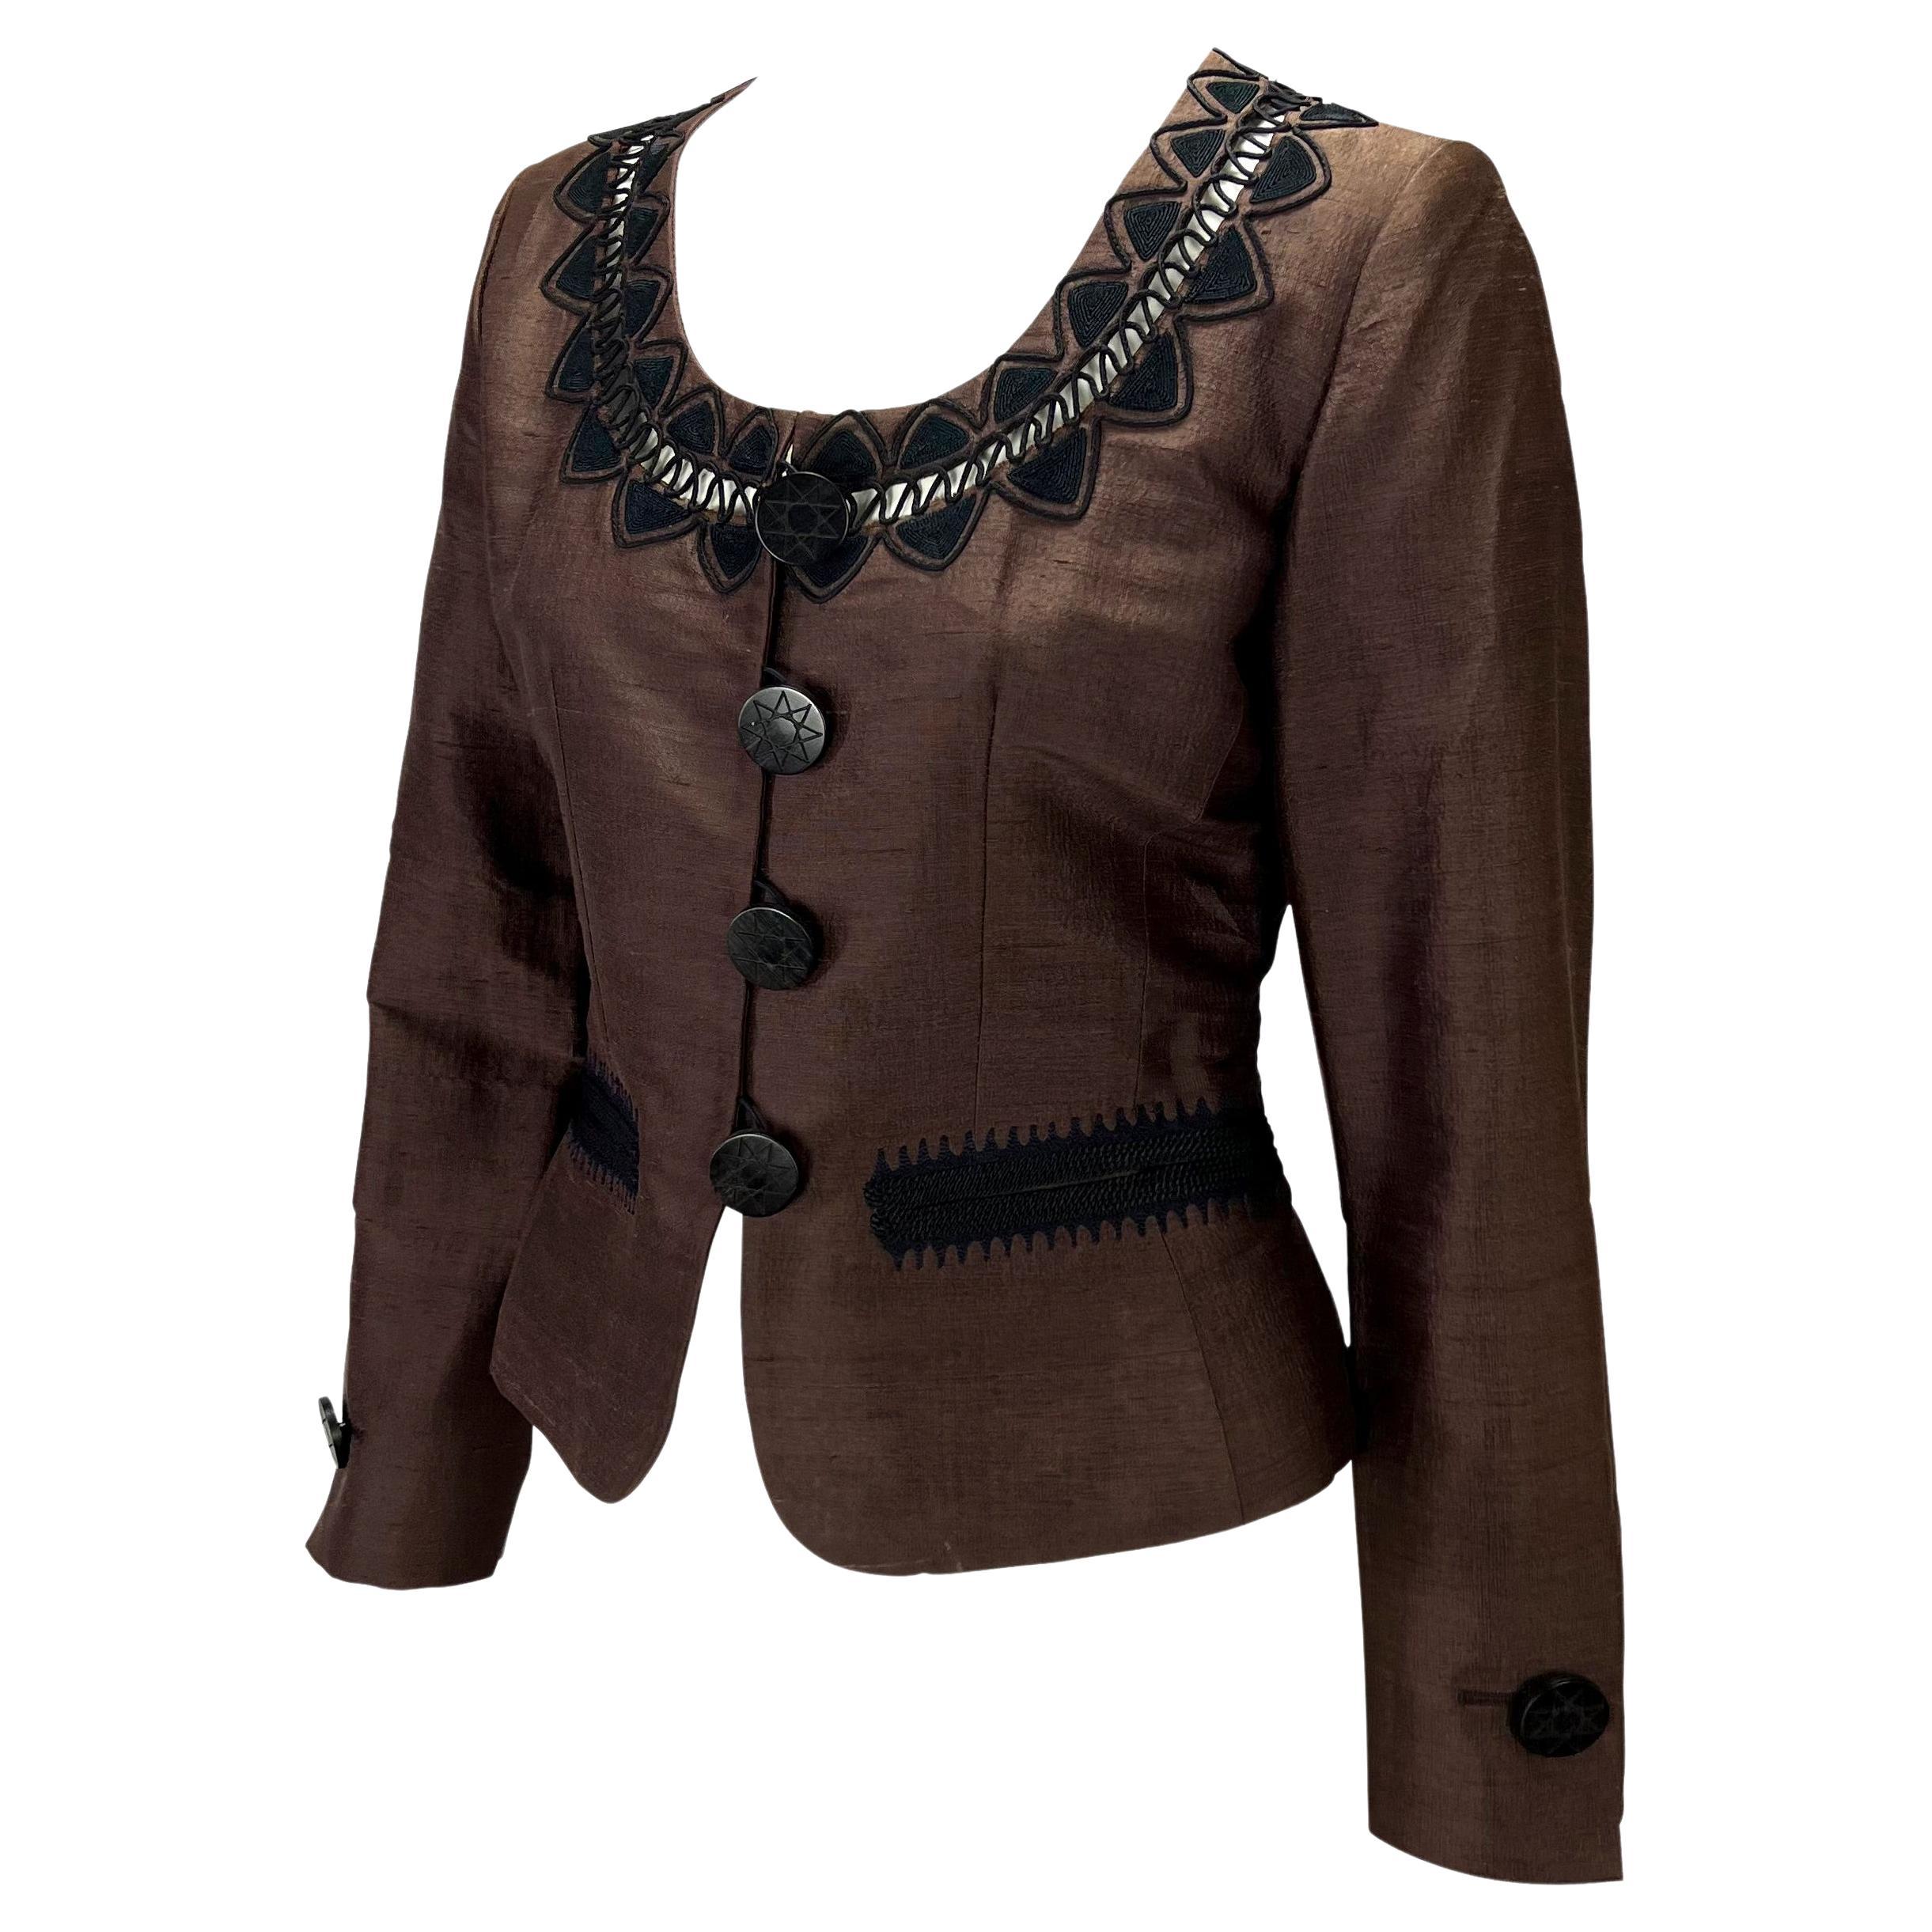 Presenting a brown Yves Saint Laurent Rive Gauche blazer. From the 1995 Cruise collection, this blazer features a scoop neckline, black embroidered details at the neckline and front pockets, and large carved buttons. 

Approximate measurements:
Size